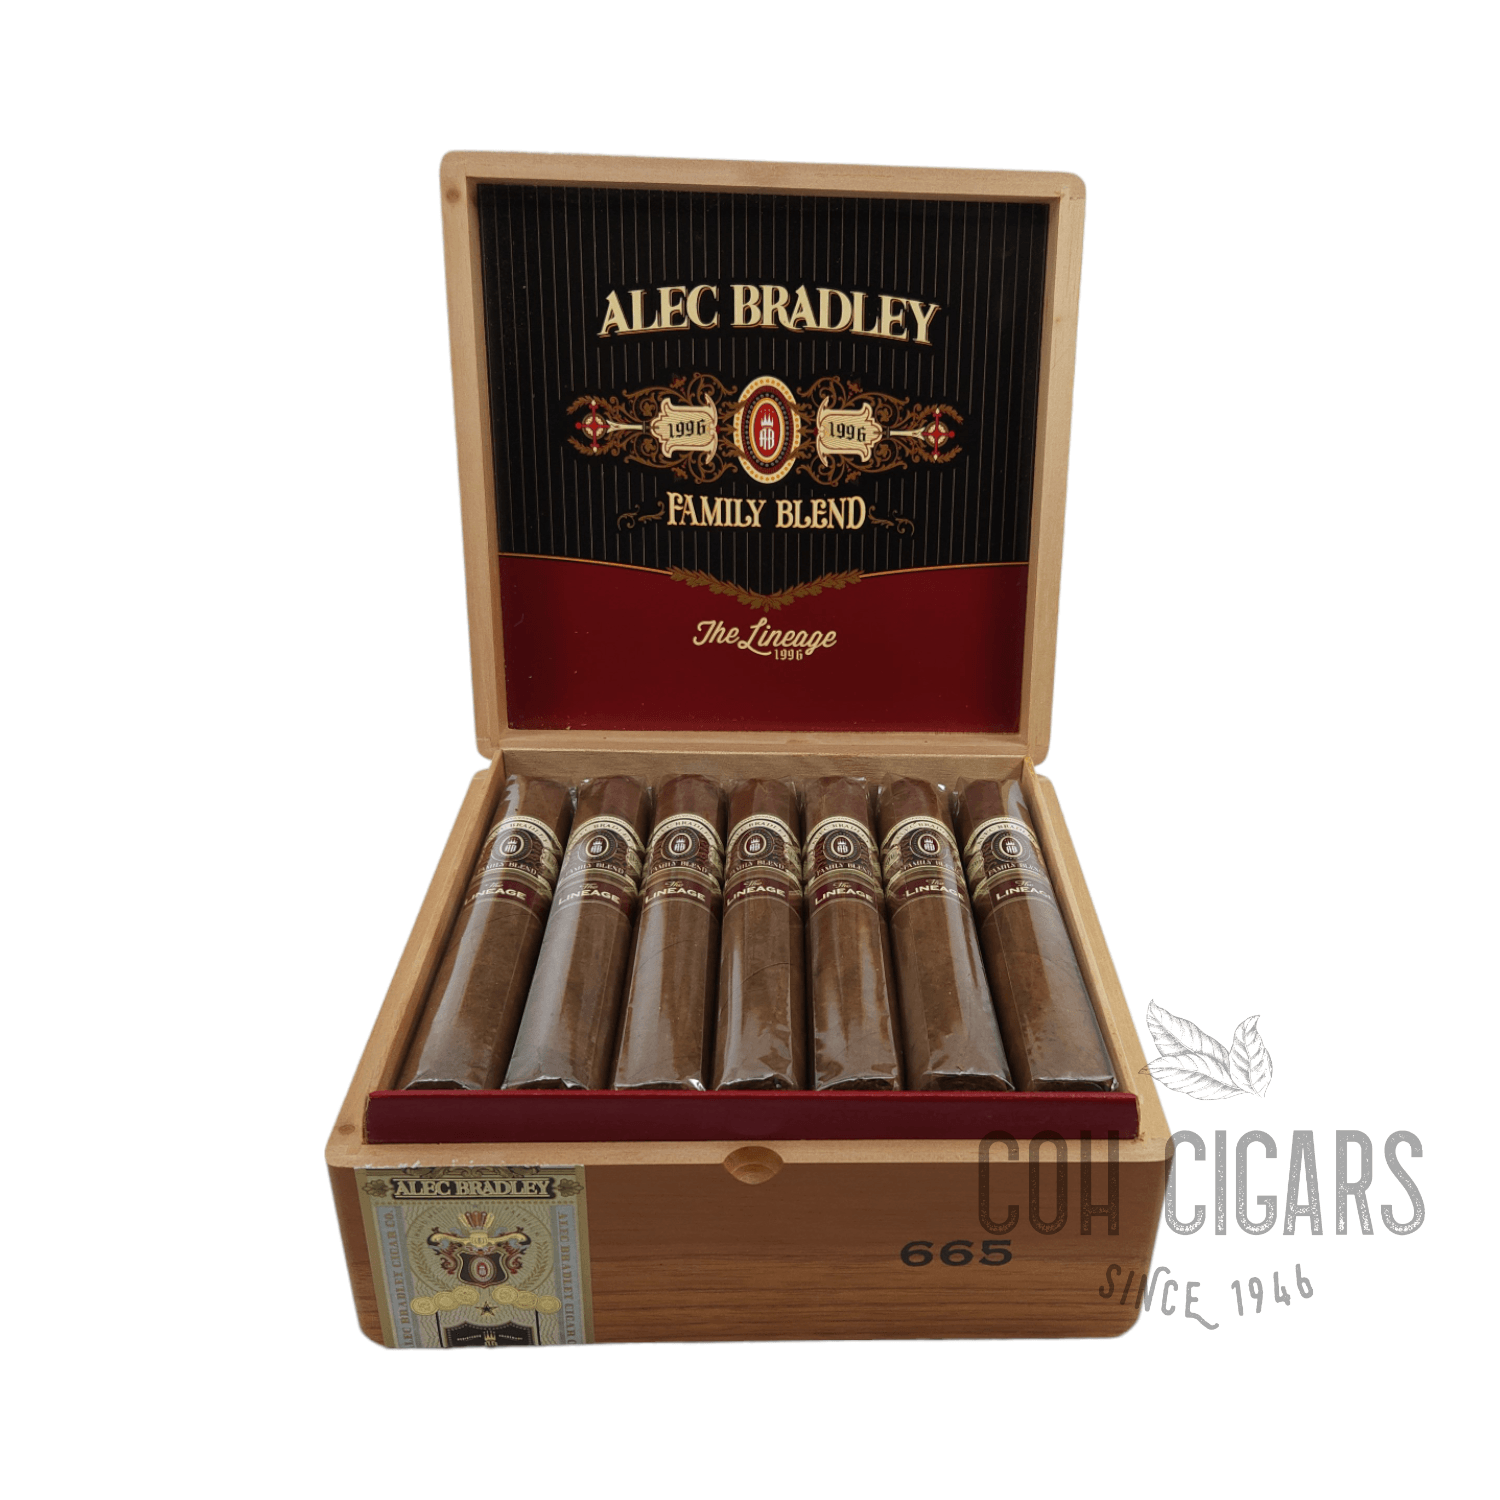 Alec Bradley The Lineage Family Blend 665 Box 20 - hk.cohcigars